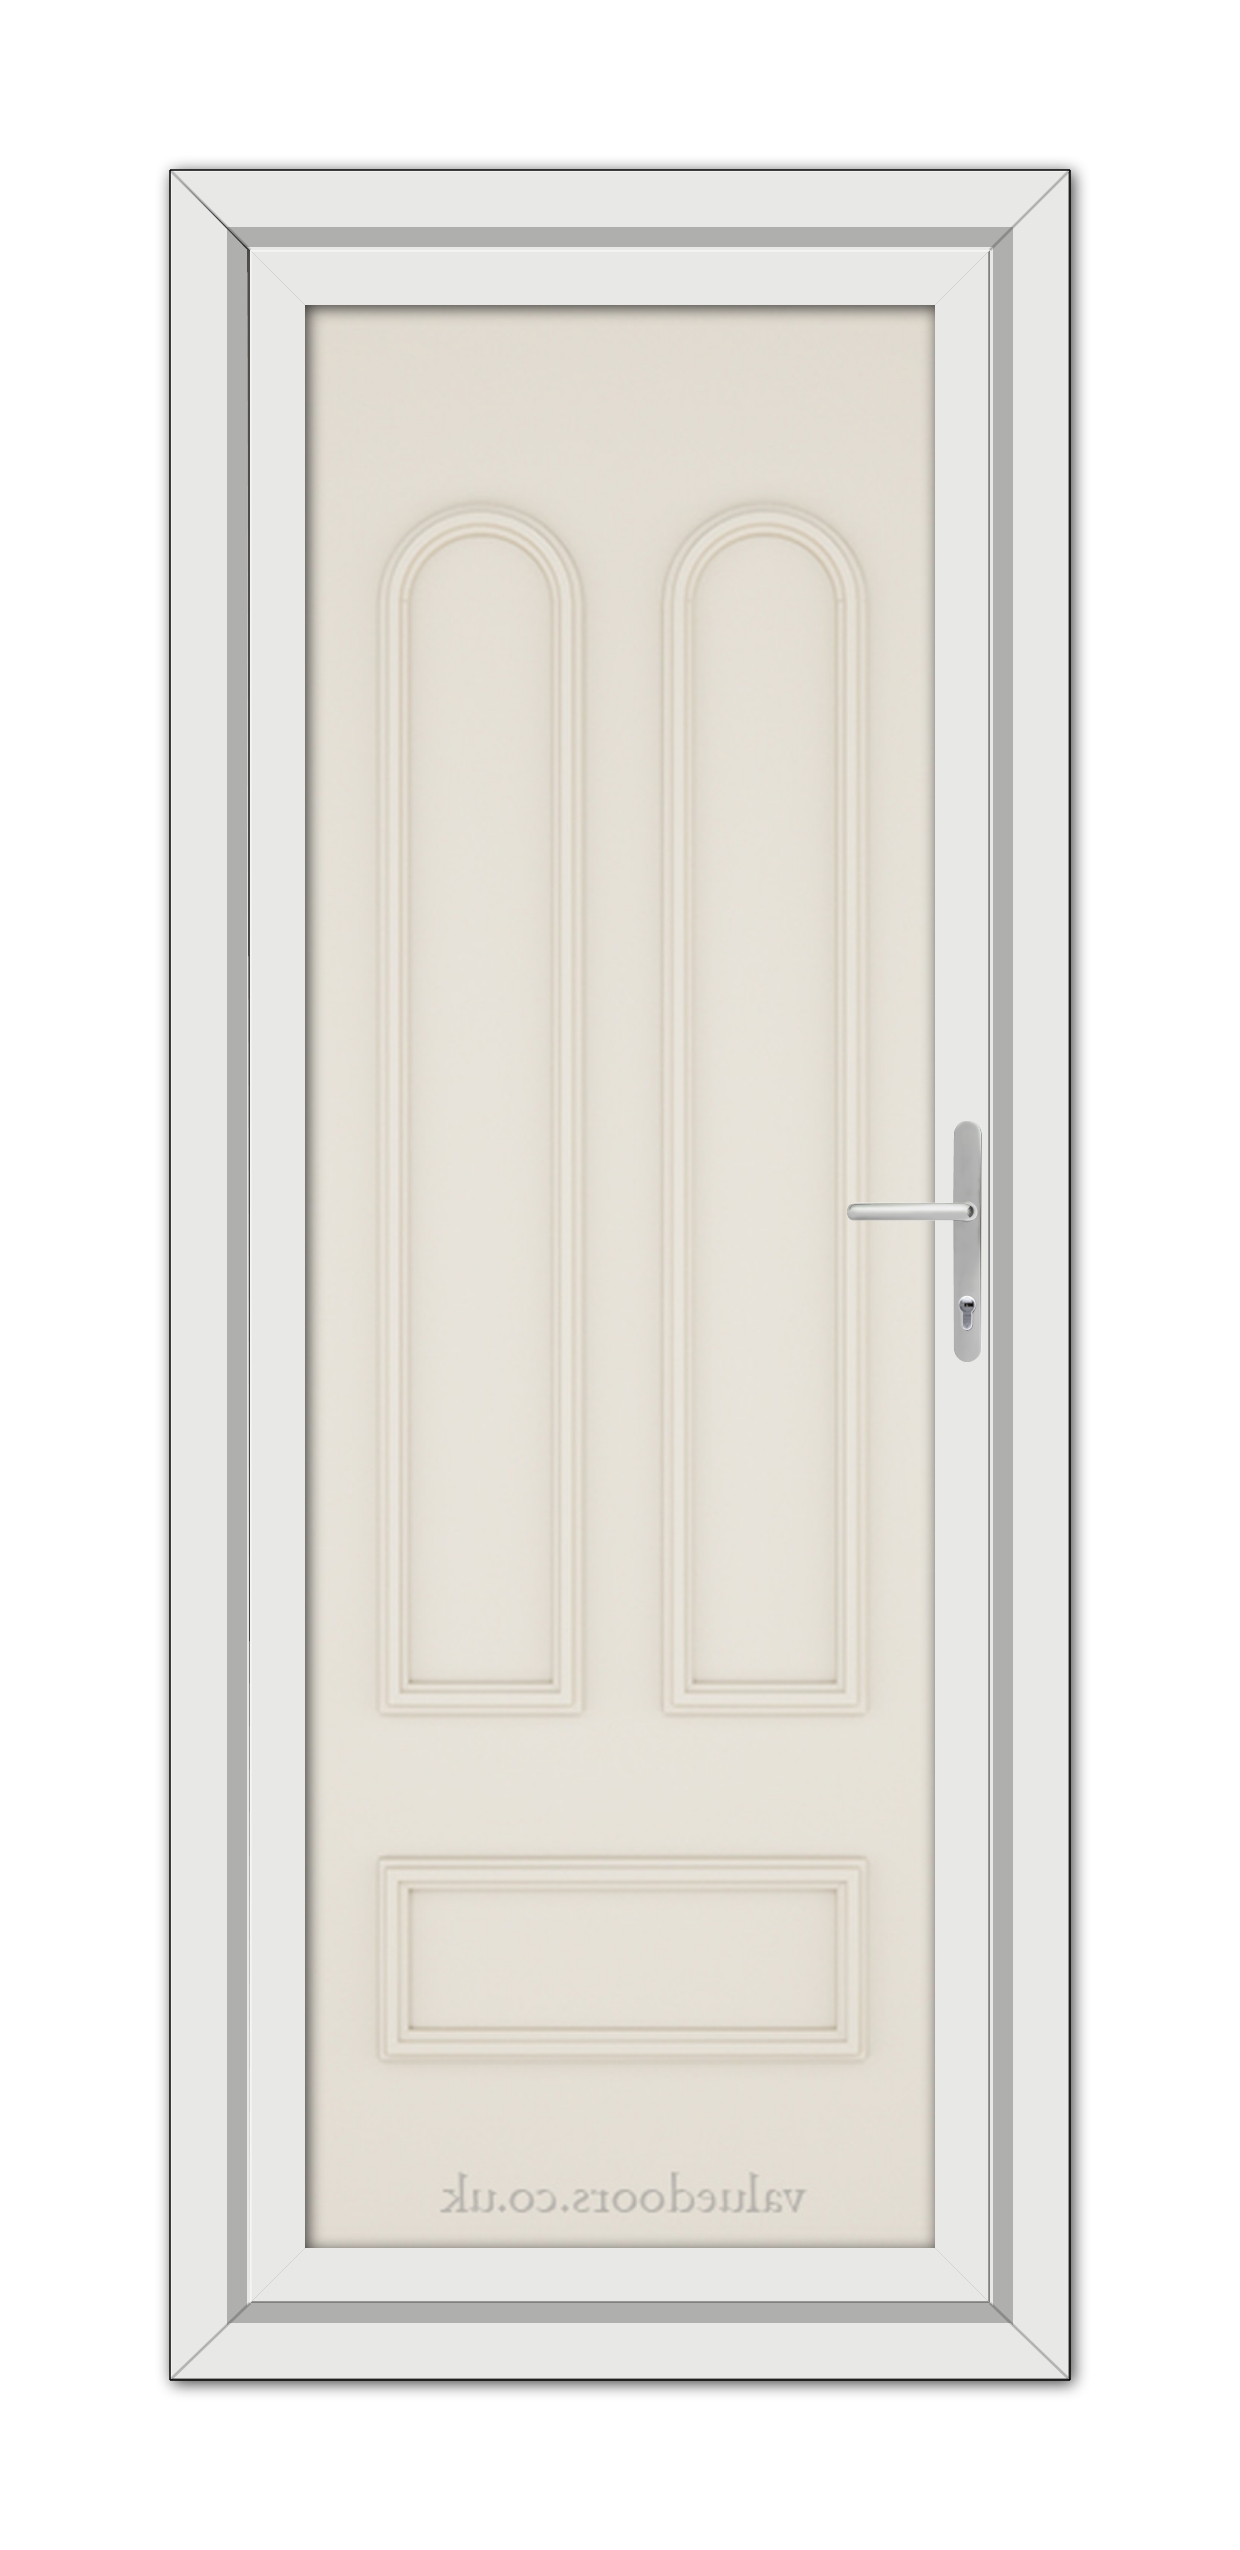 A vertical image of a Cream Madrid Solid uPVC Door with a modern handle, set within a frame, viewed from the front.